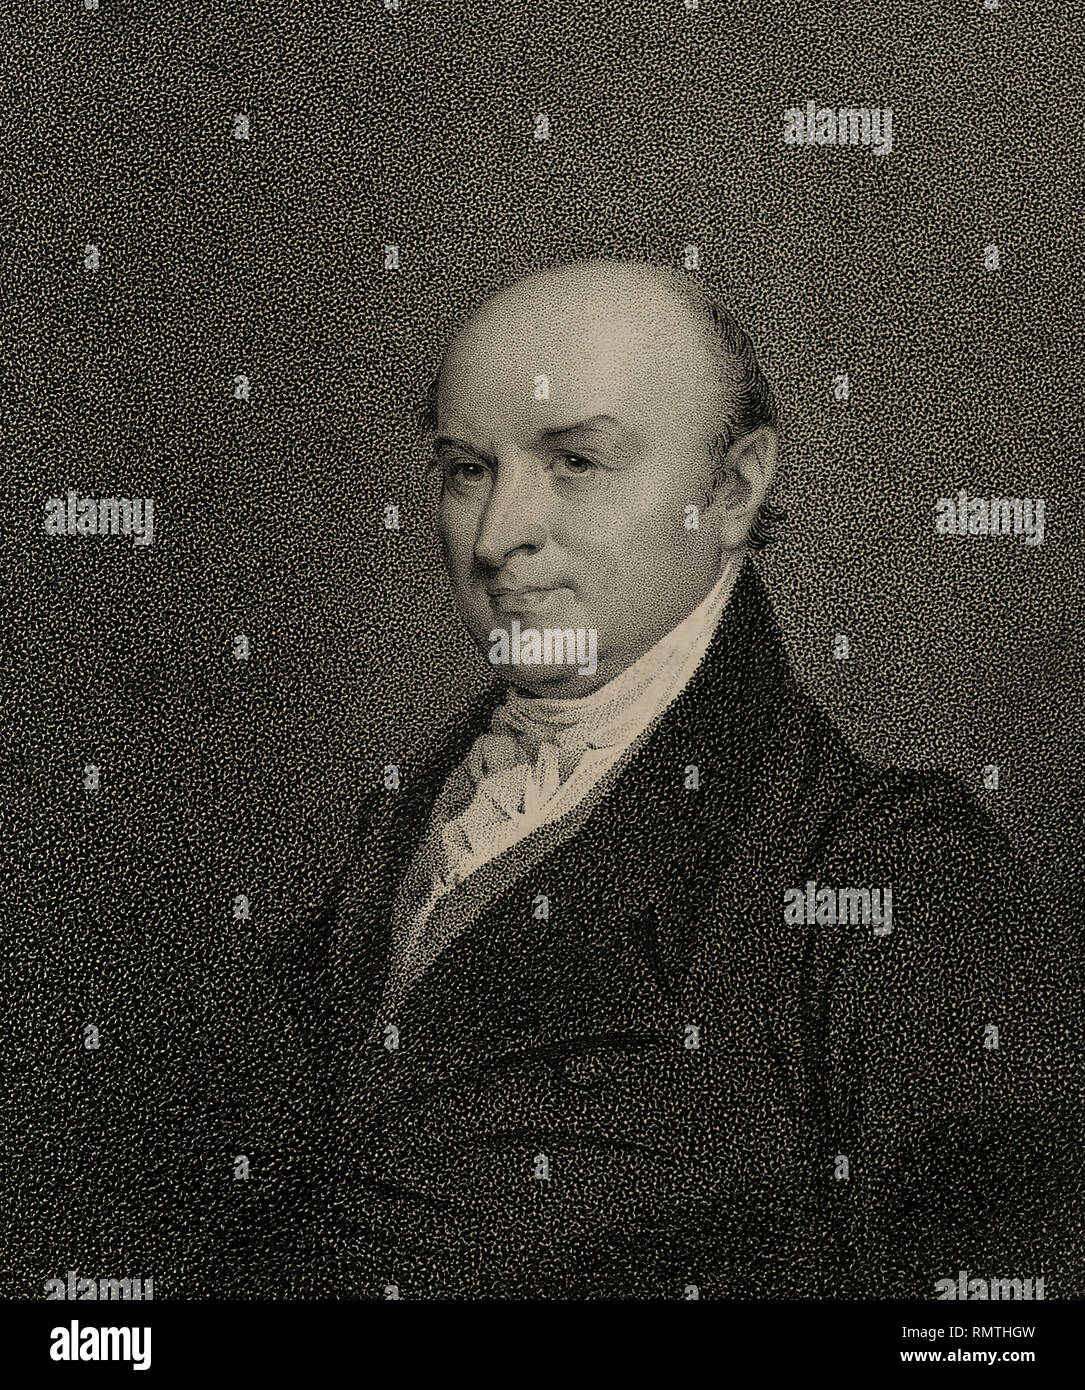 John Quincy Adams (1767-1848), Sixth President of the United States, Head and Shoulders Portrait, Engraving by James Barton Longacre, 1825 Stock Photo